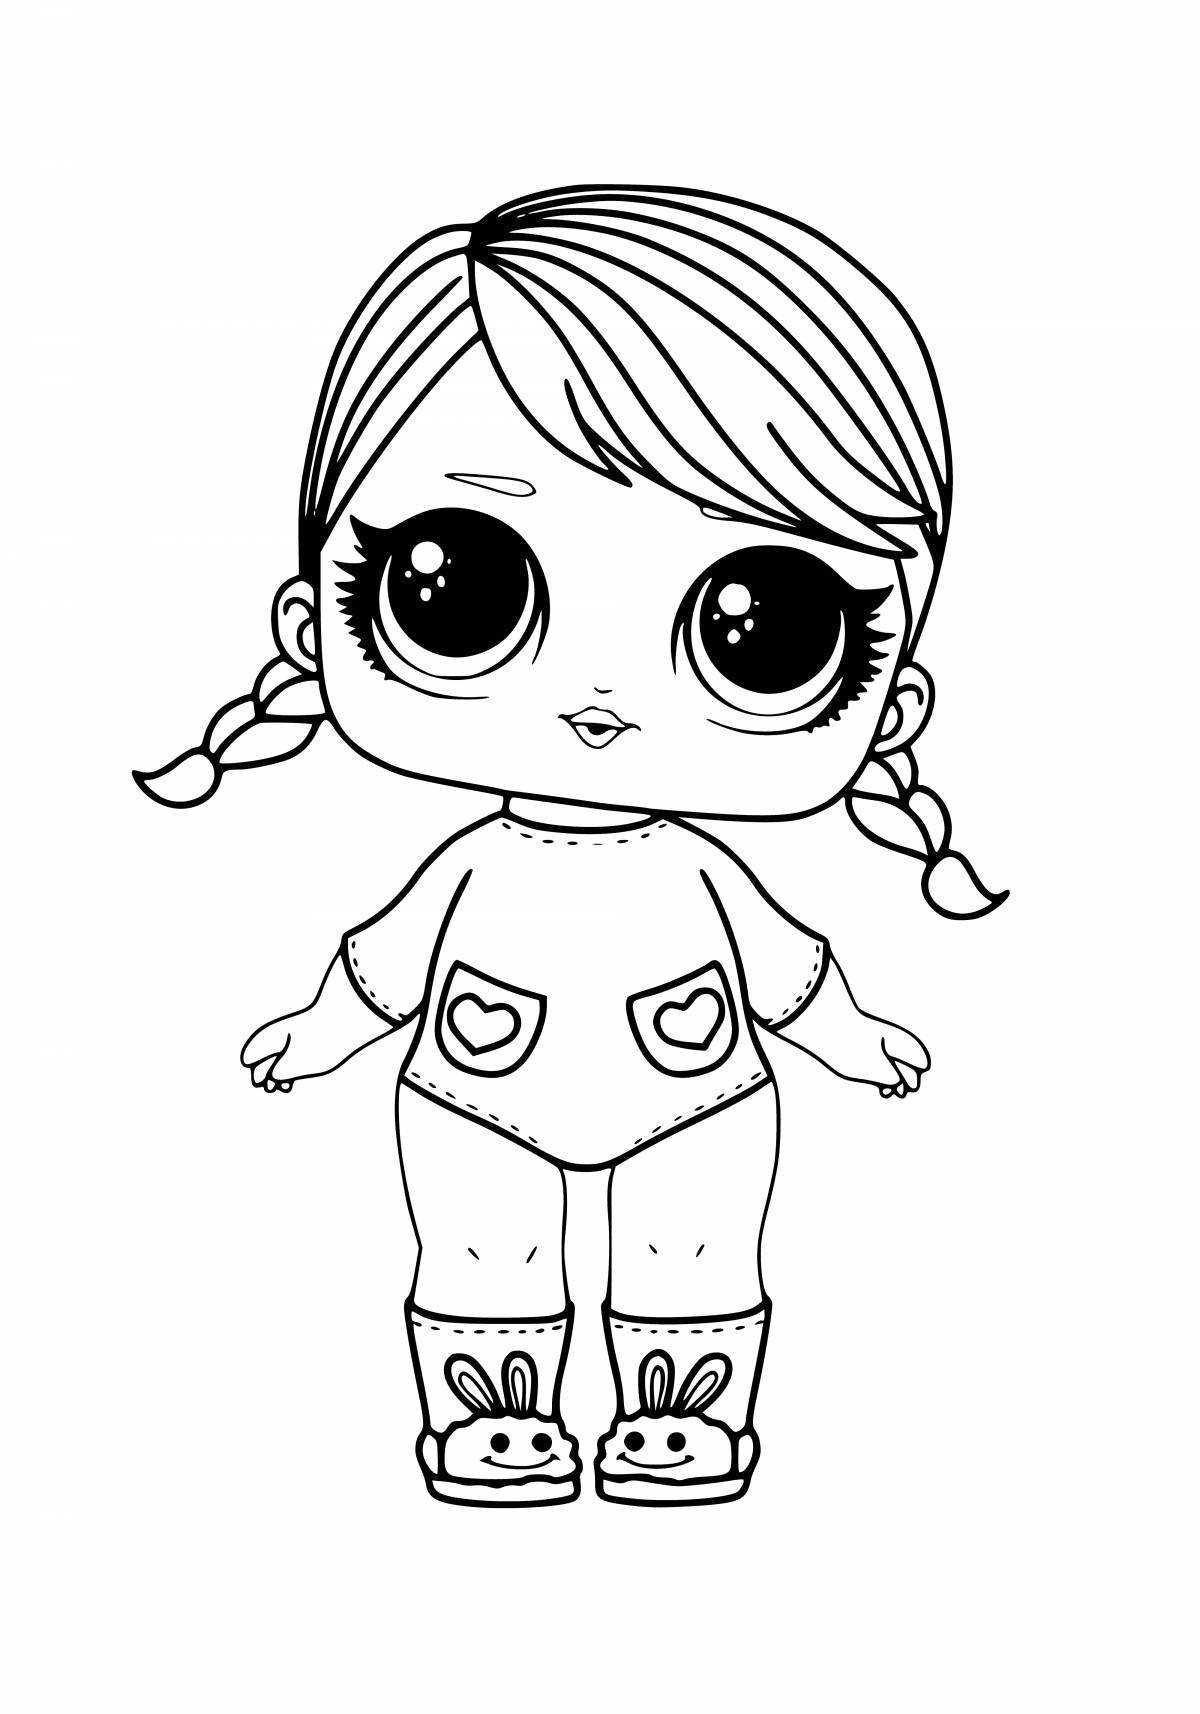 Lola magic dolls coloring pages for kids